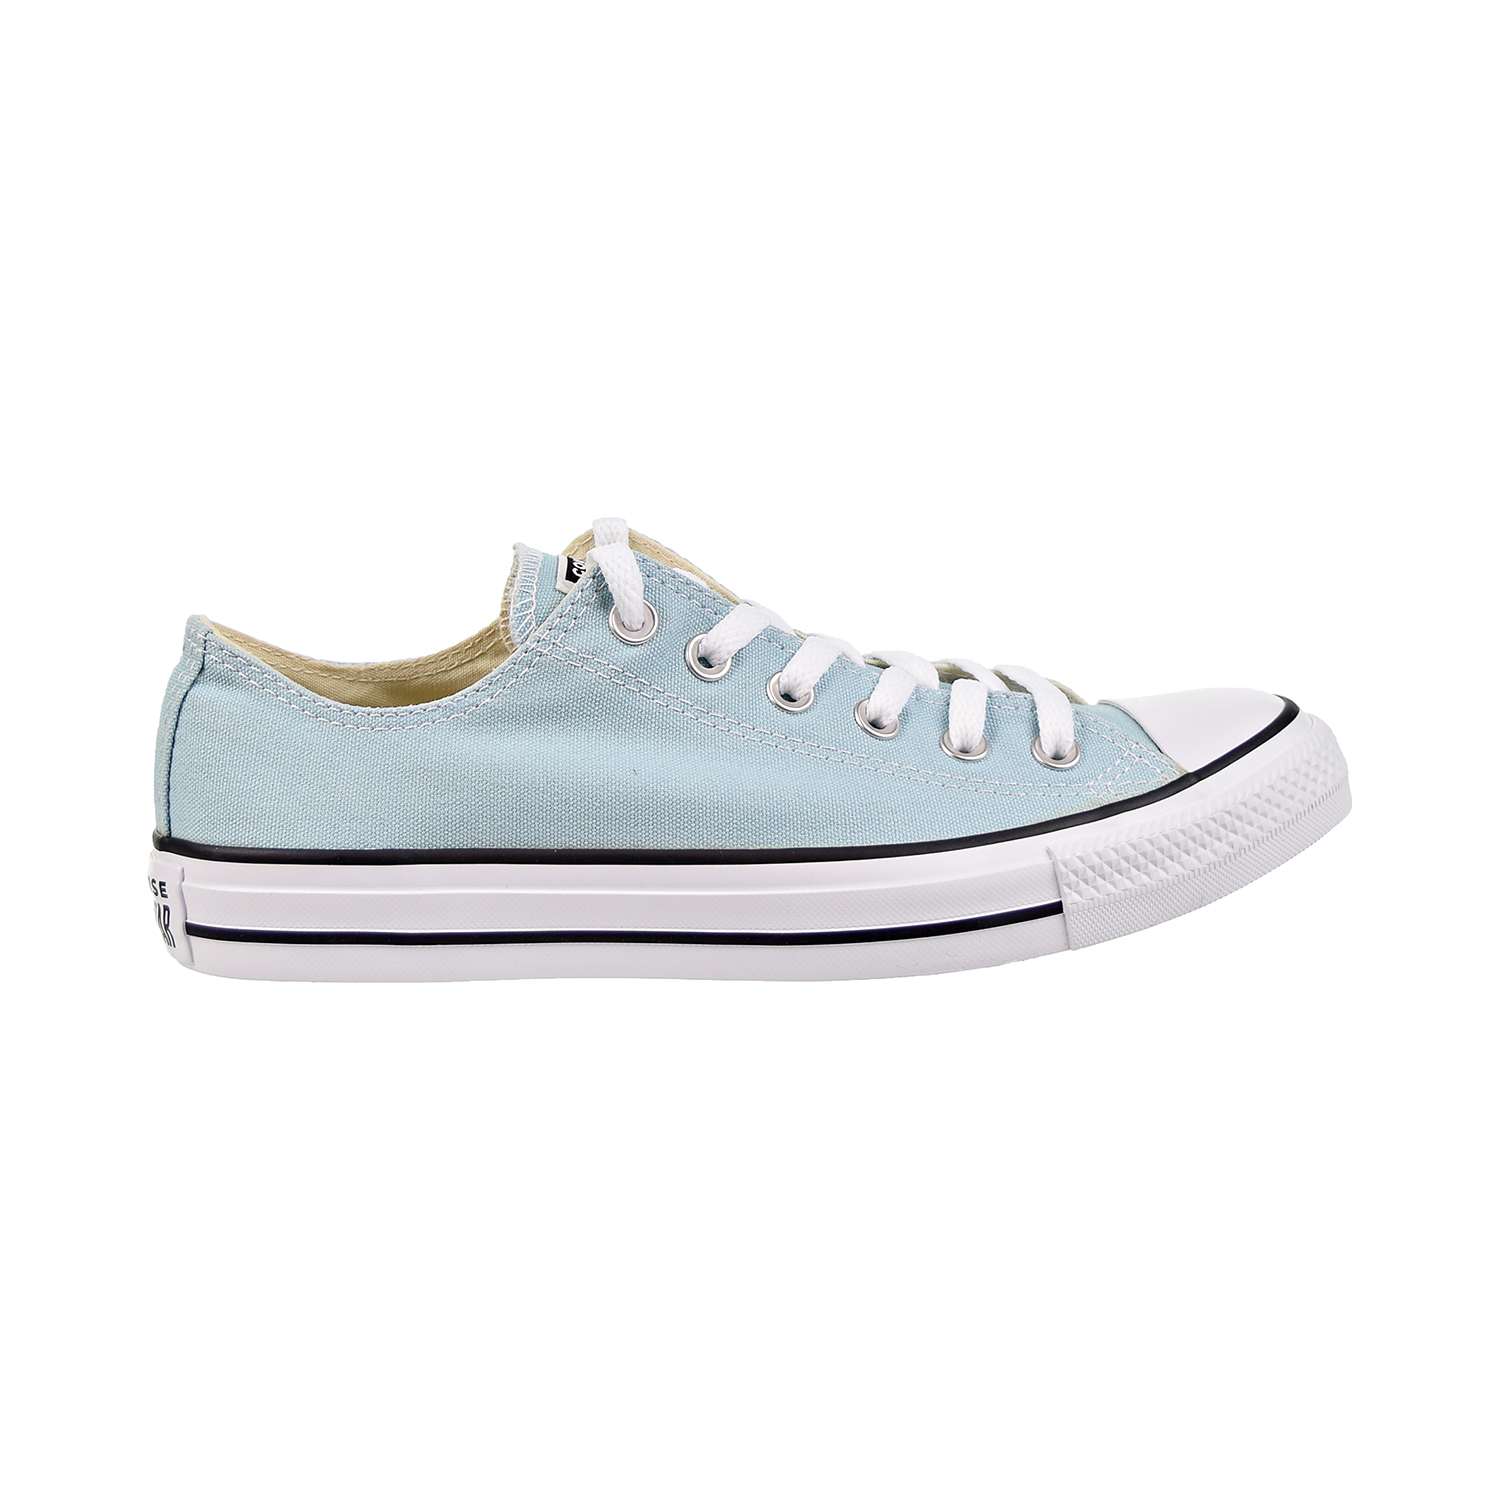 Converse Taylor All Star Men's Shoes Ocean Bliss